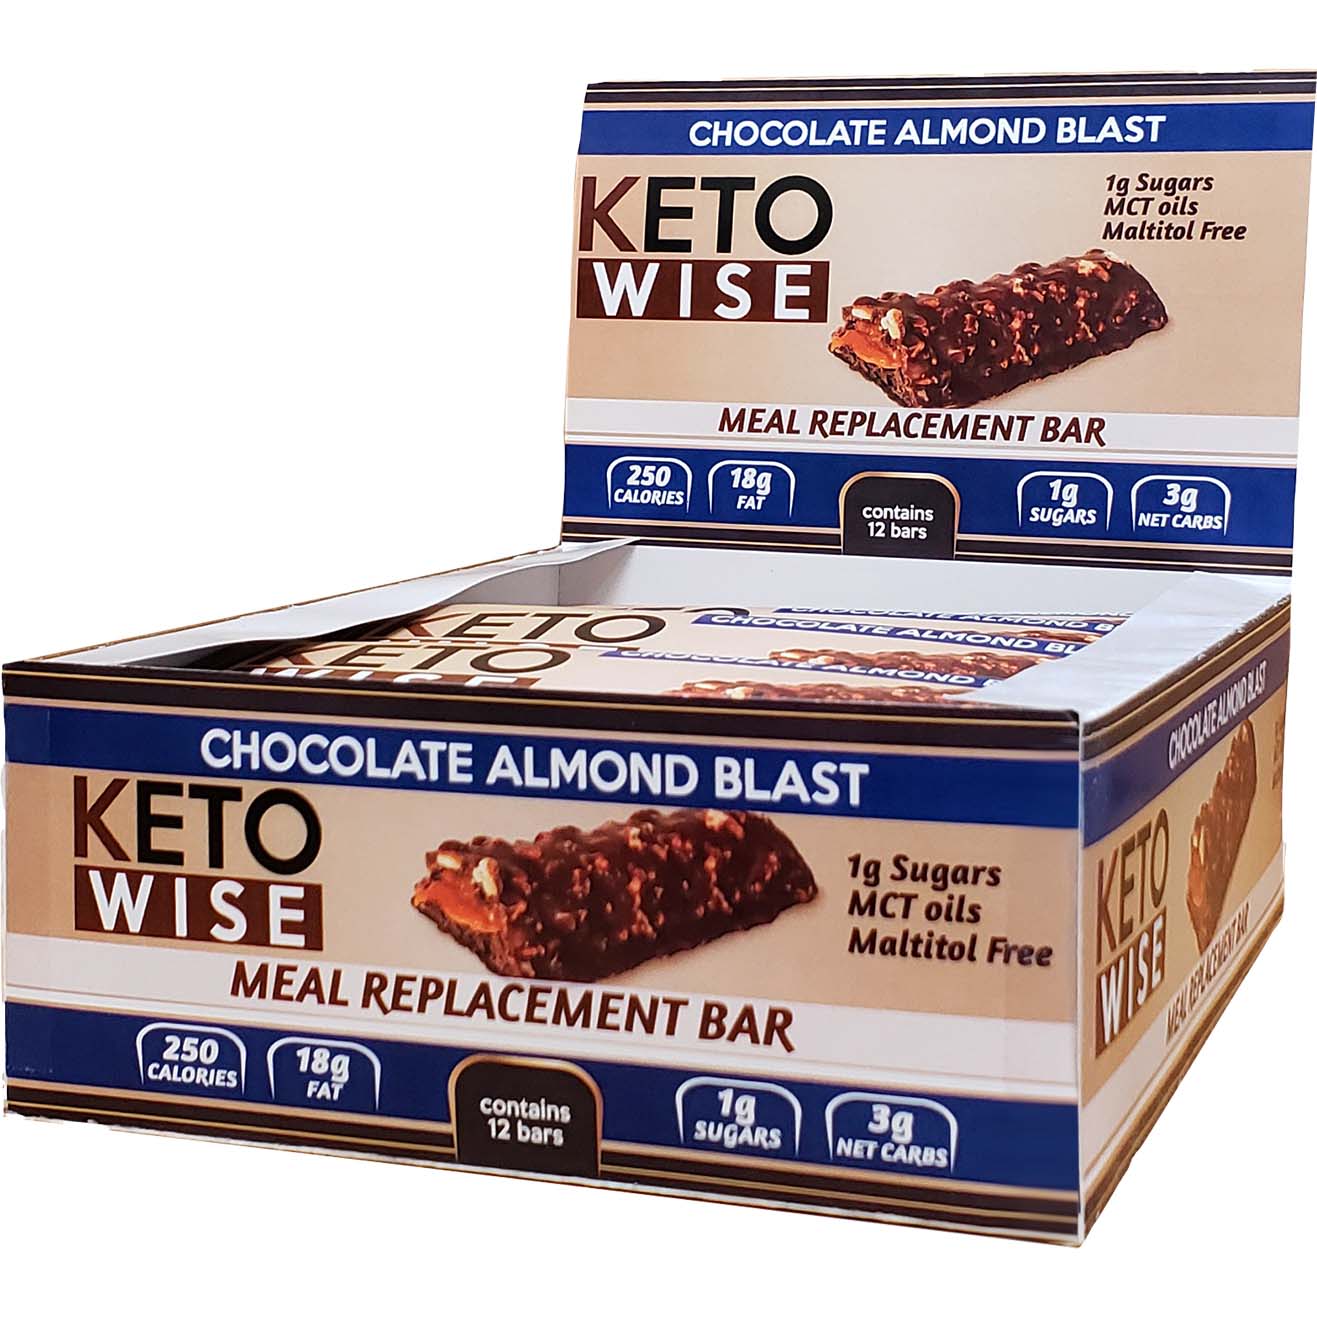 Keto Wise Meal Replacement Bar, Chocolate Almond Blast, Box of 12 Bars